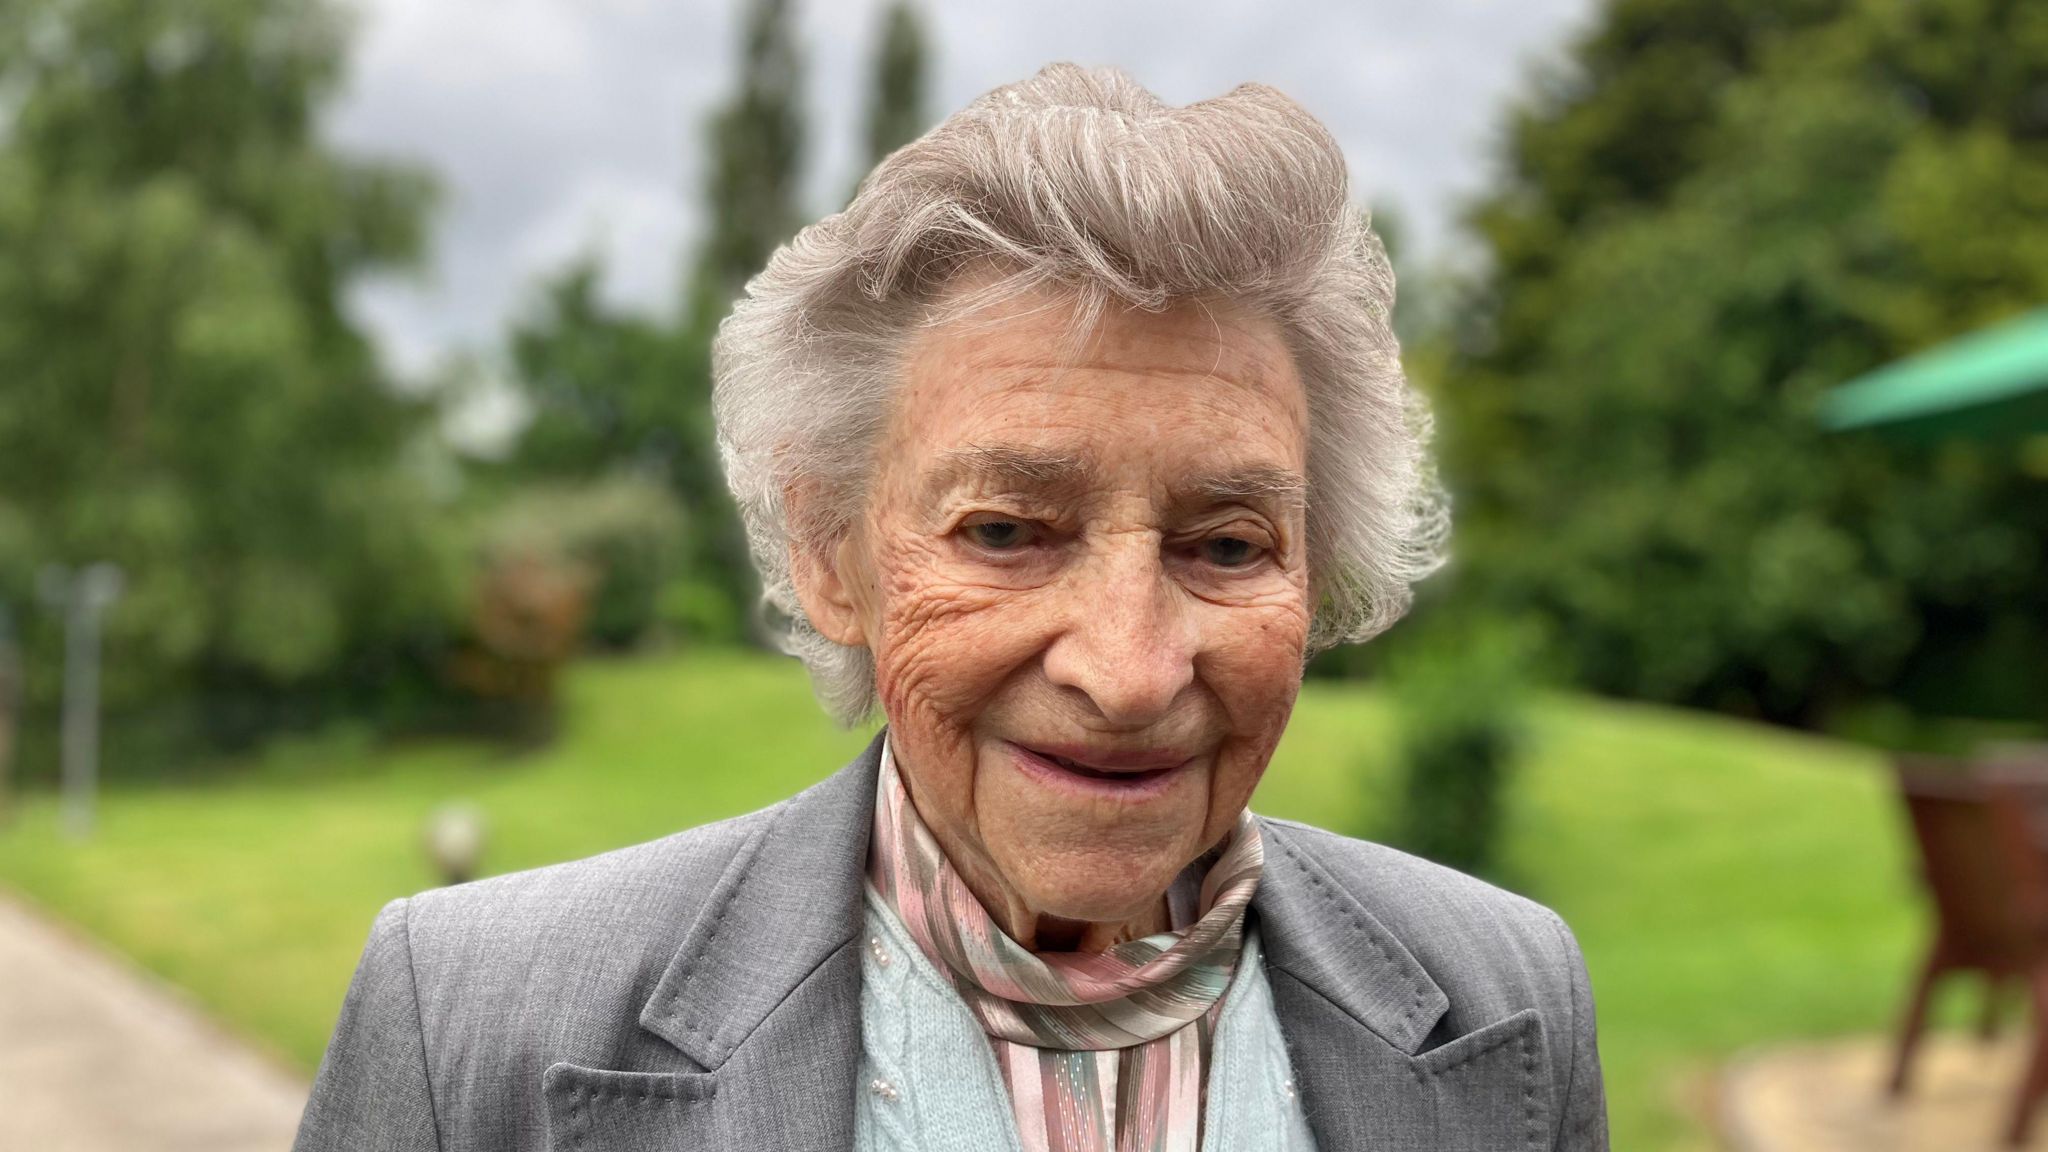 Barbara Buttrick keeps a keen interest in boxing from her residential care home